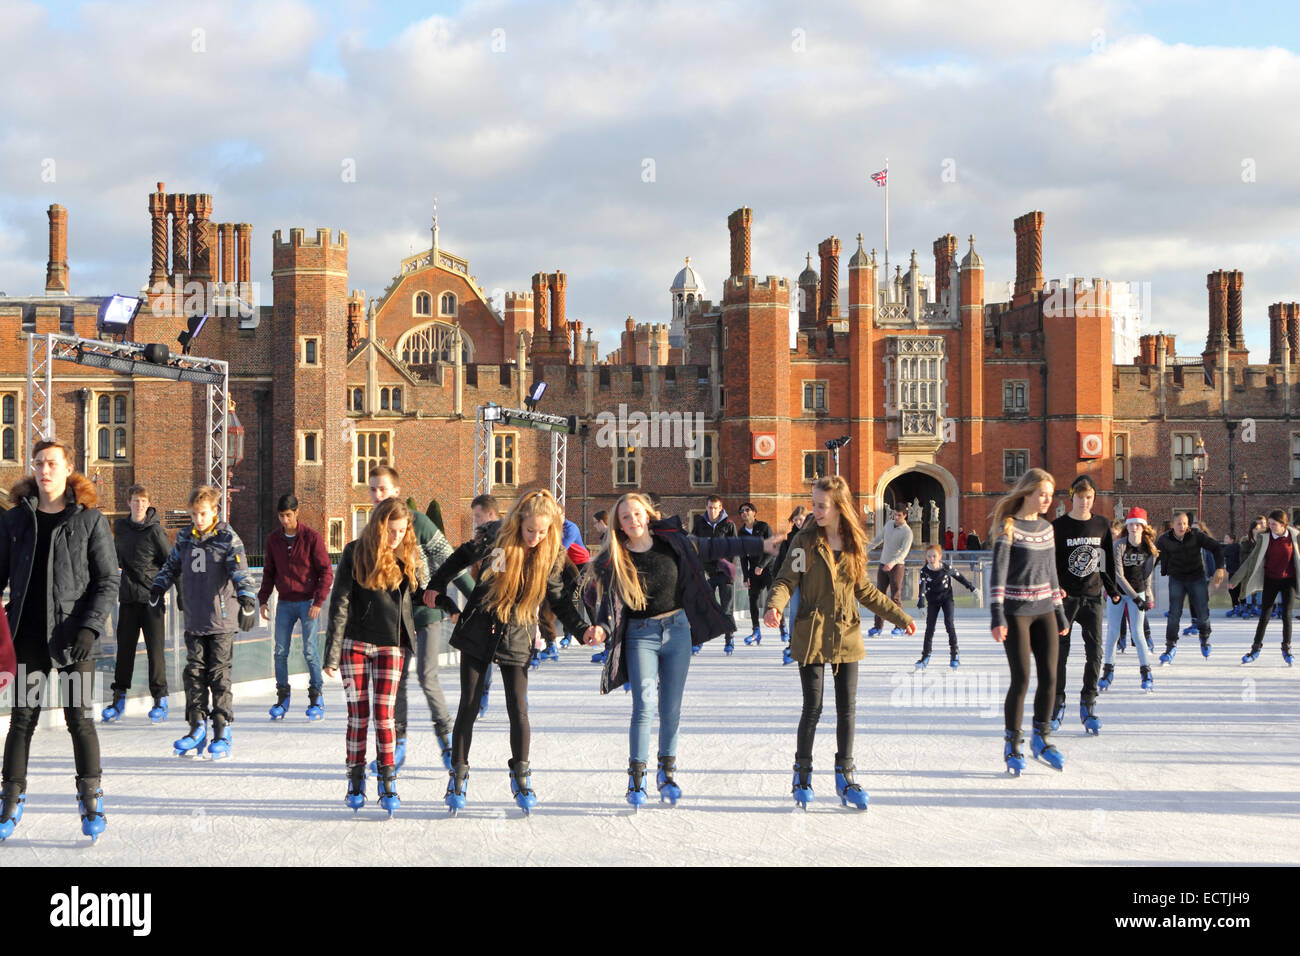 Hampton Court, SW London, England UK. 19th December 2014. On chilly but sunny day in SW London, friends, families and school parties enjoy festive fun at the Ice Rink in the grounds of Hampton Court Palace. It is a magical setting, surrounded by the Tudor Palace of Henry VIII, the River Thames and the gardens of Hampton Court. Credit:  Julia Gavin UK/Alamy Live News Stock Photo